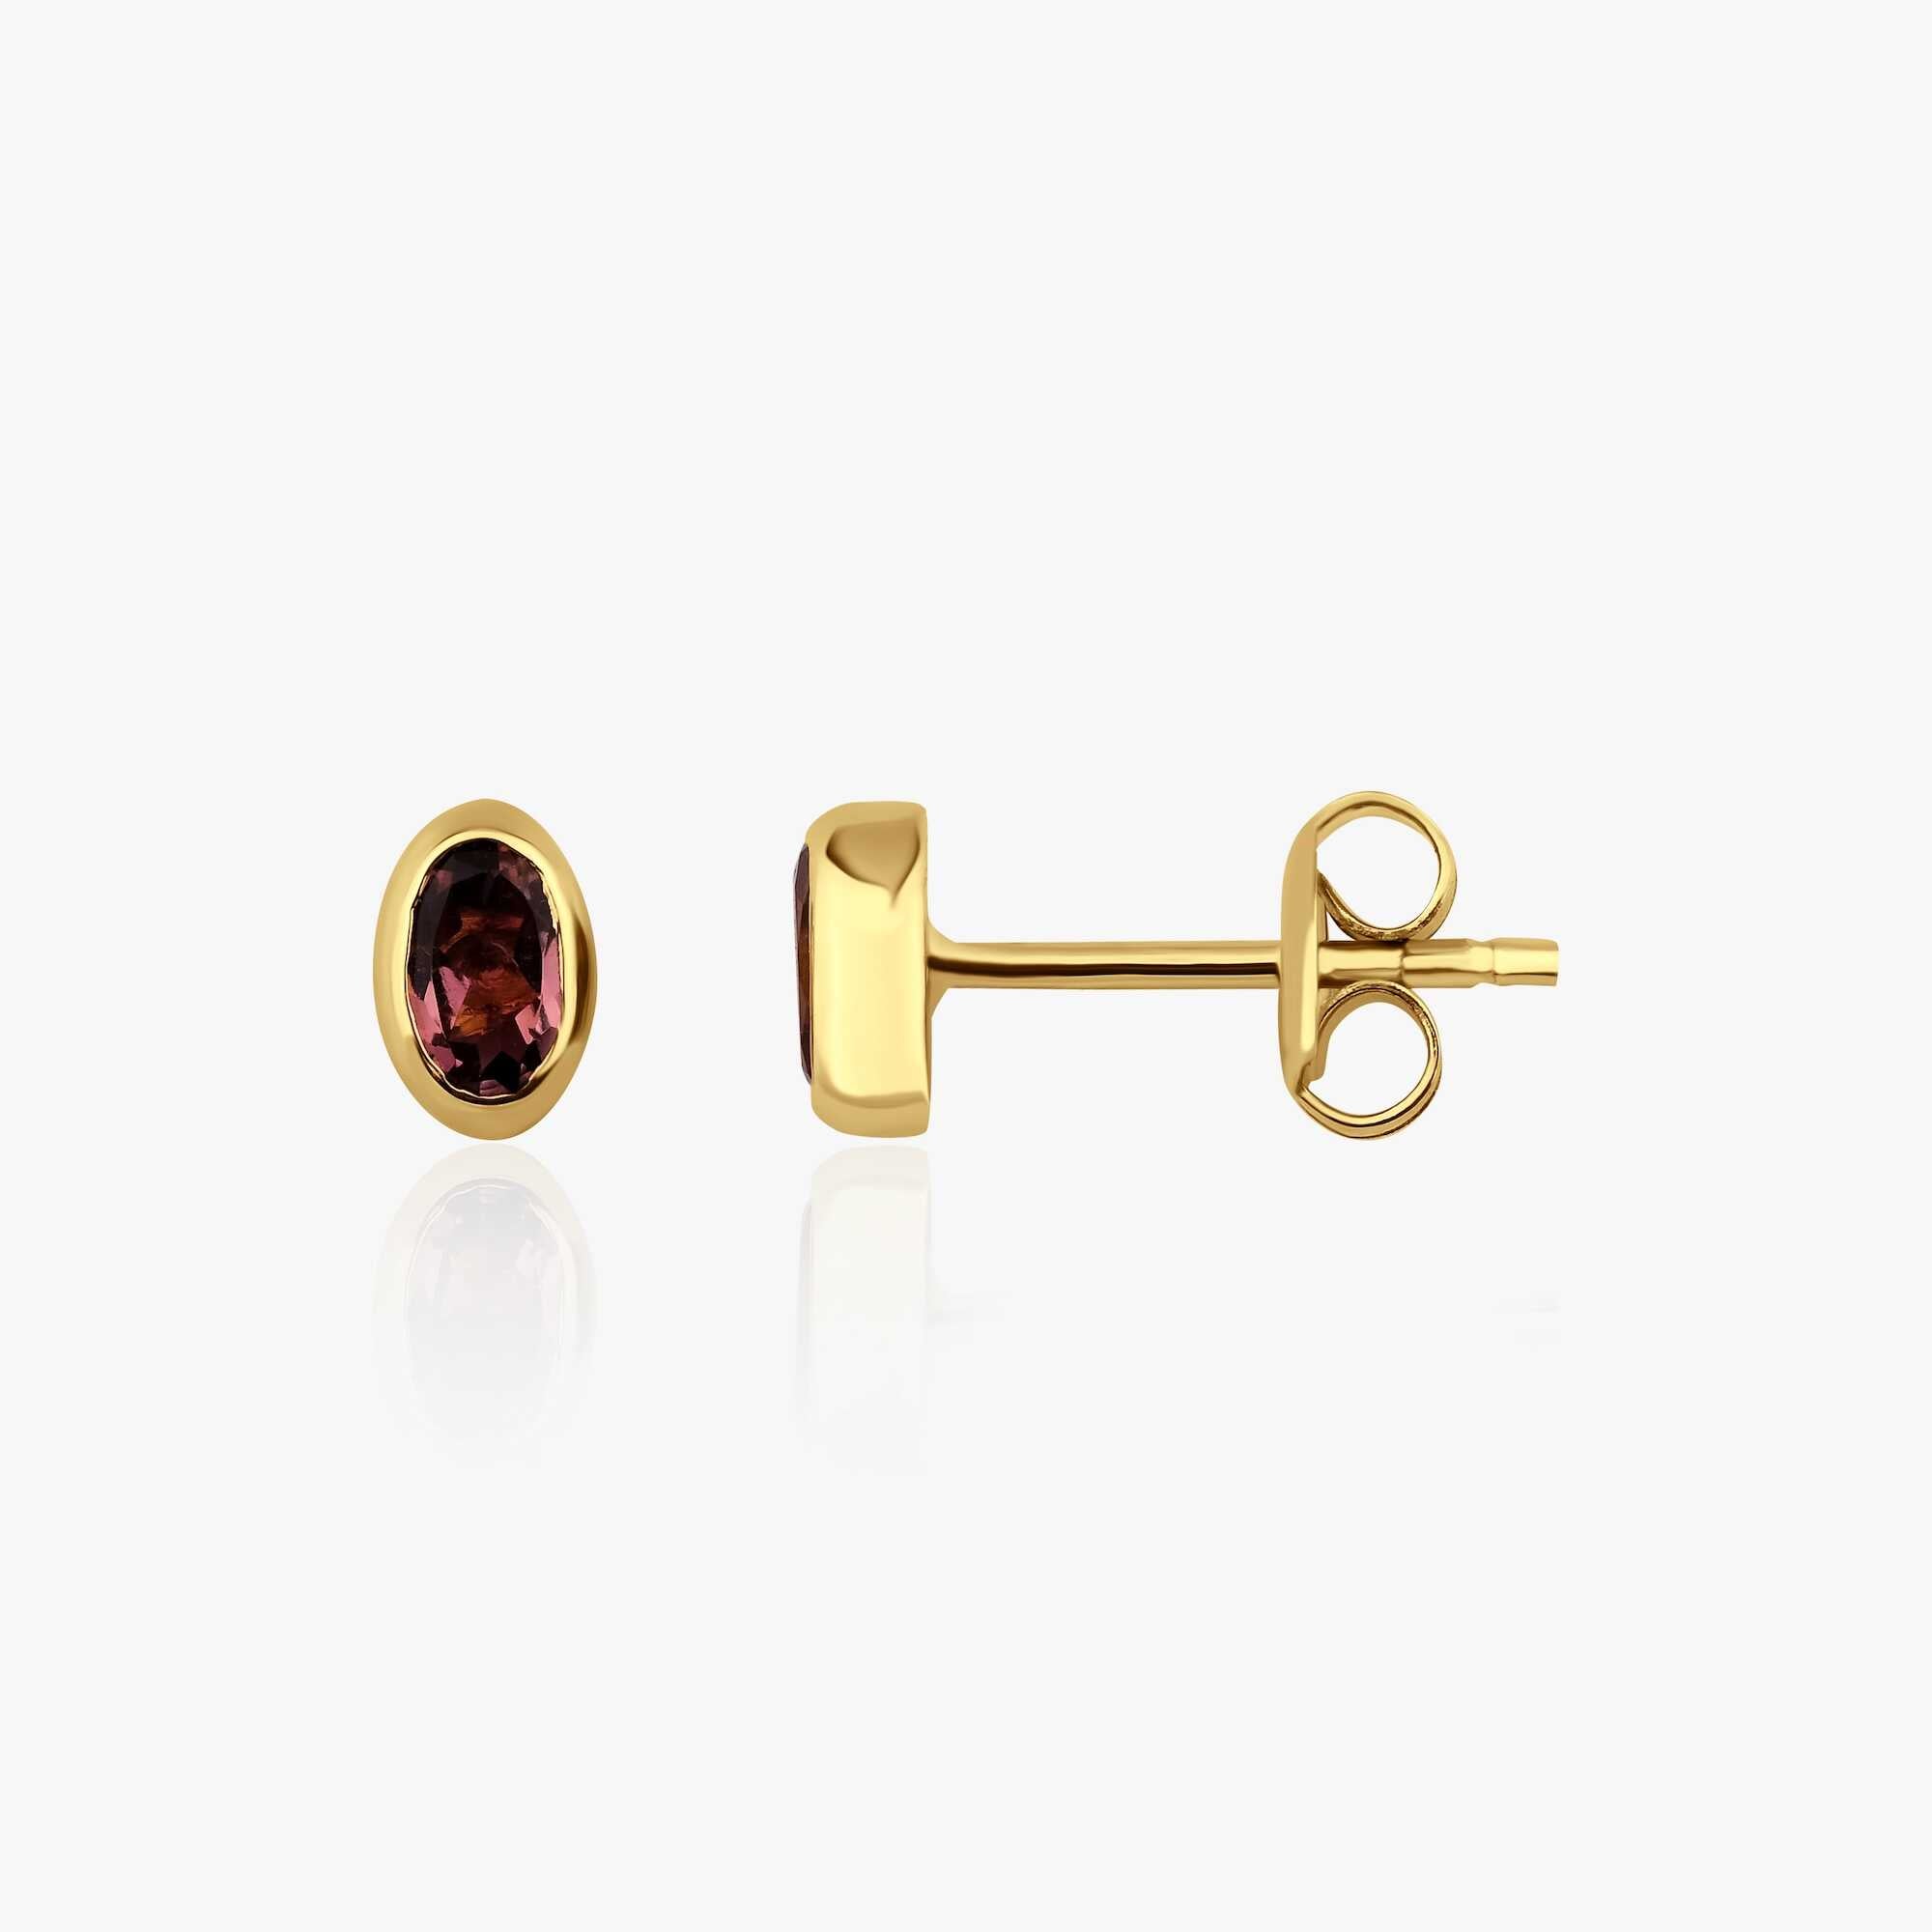 Oval Cut Pink Tourmaline Stud Earrings Available in 14K and 18K Gold